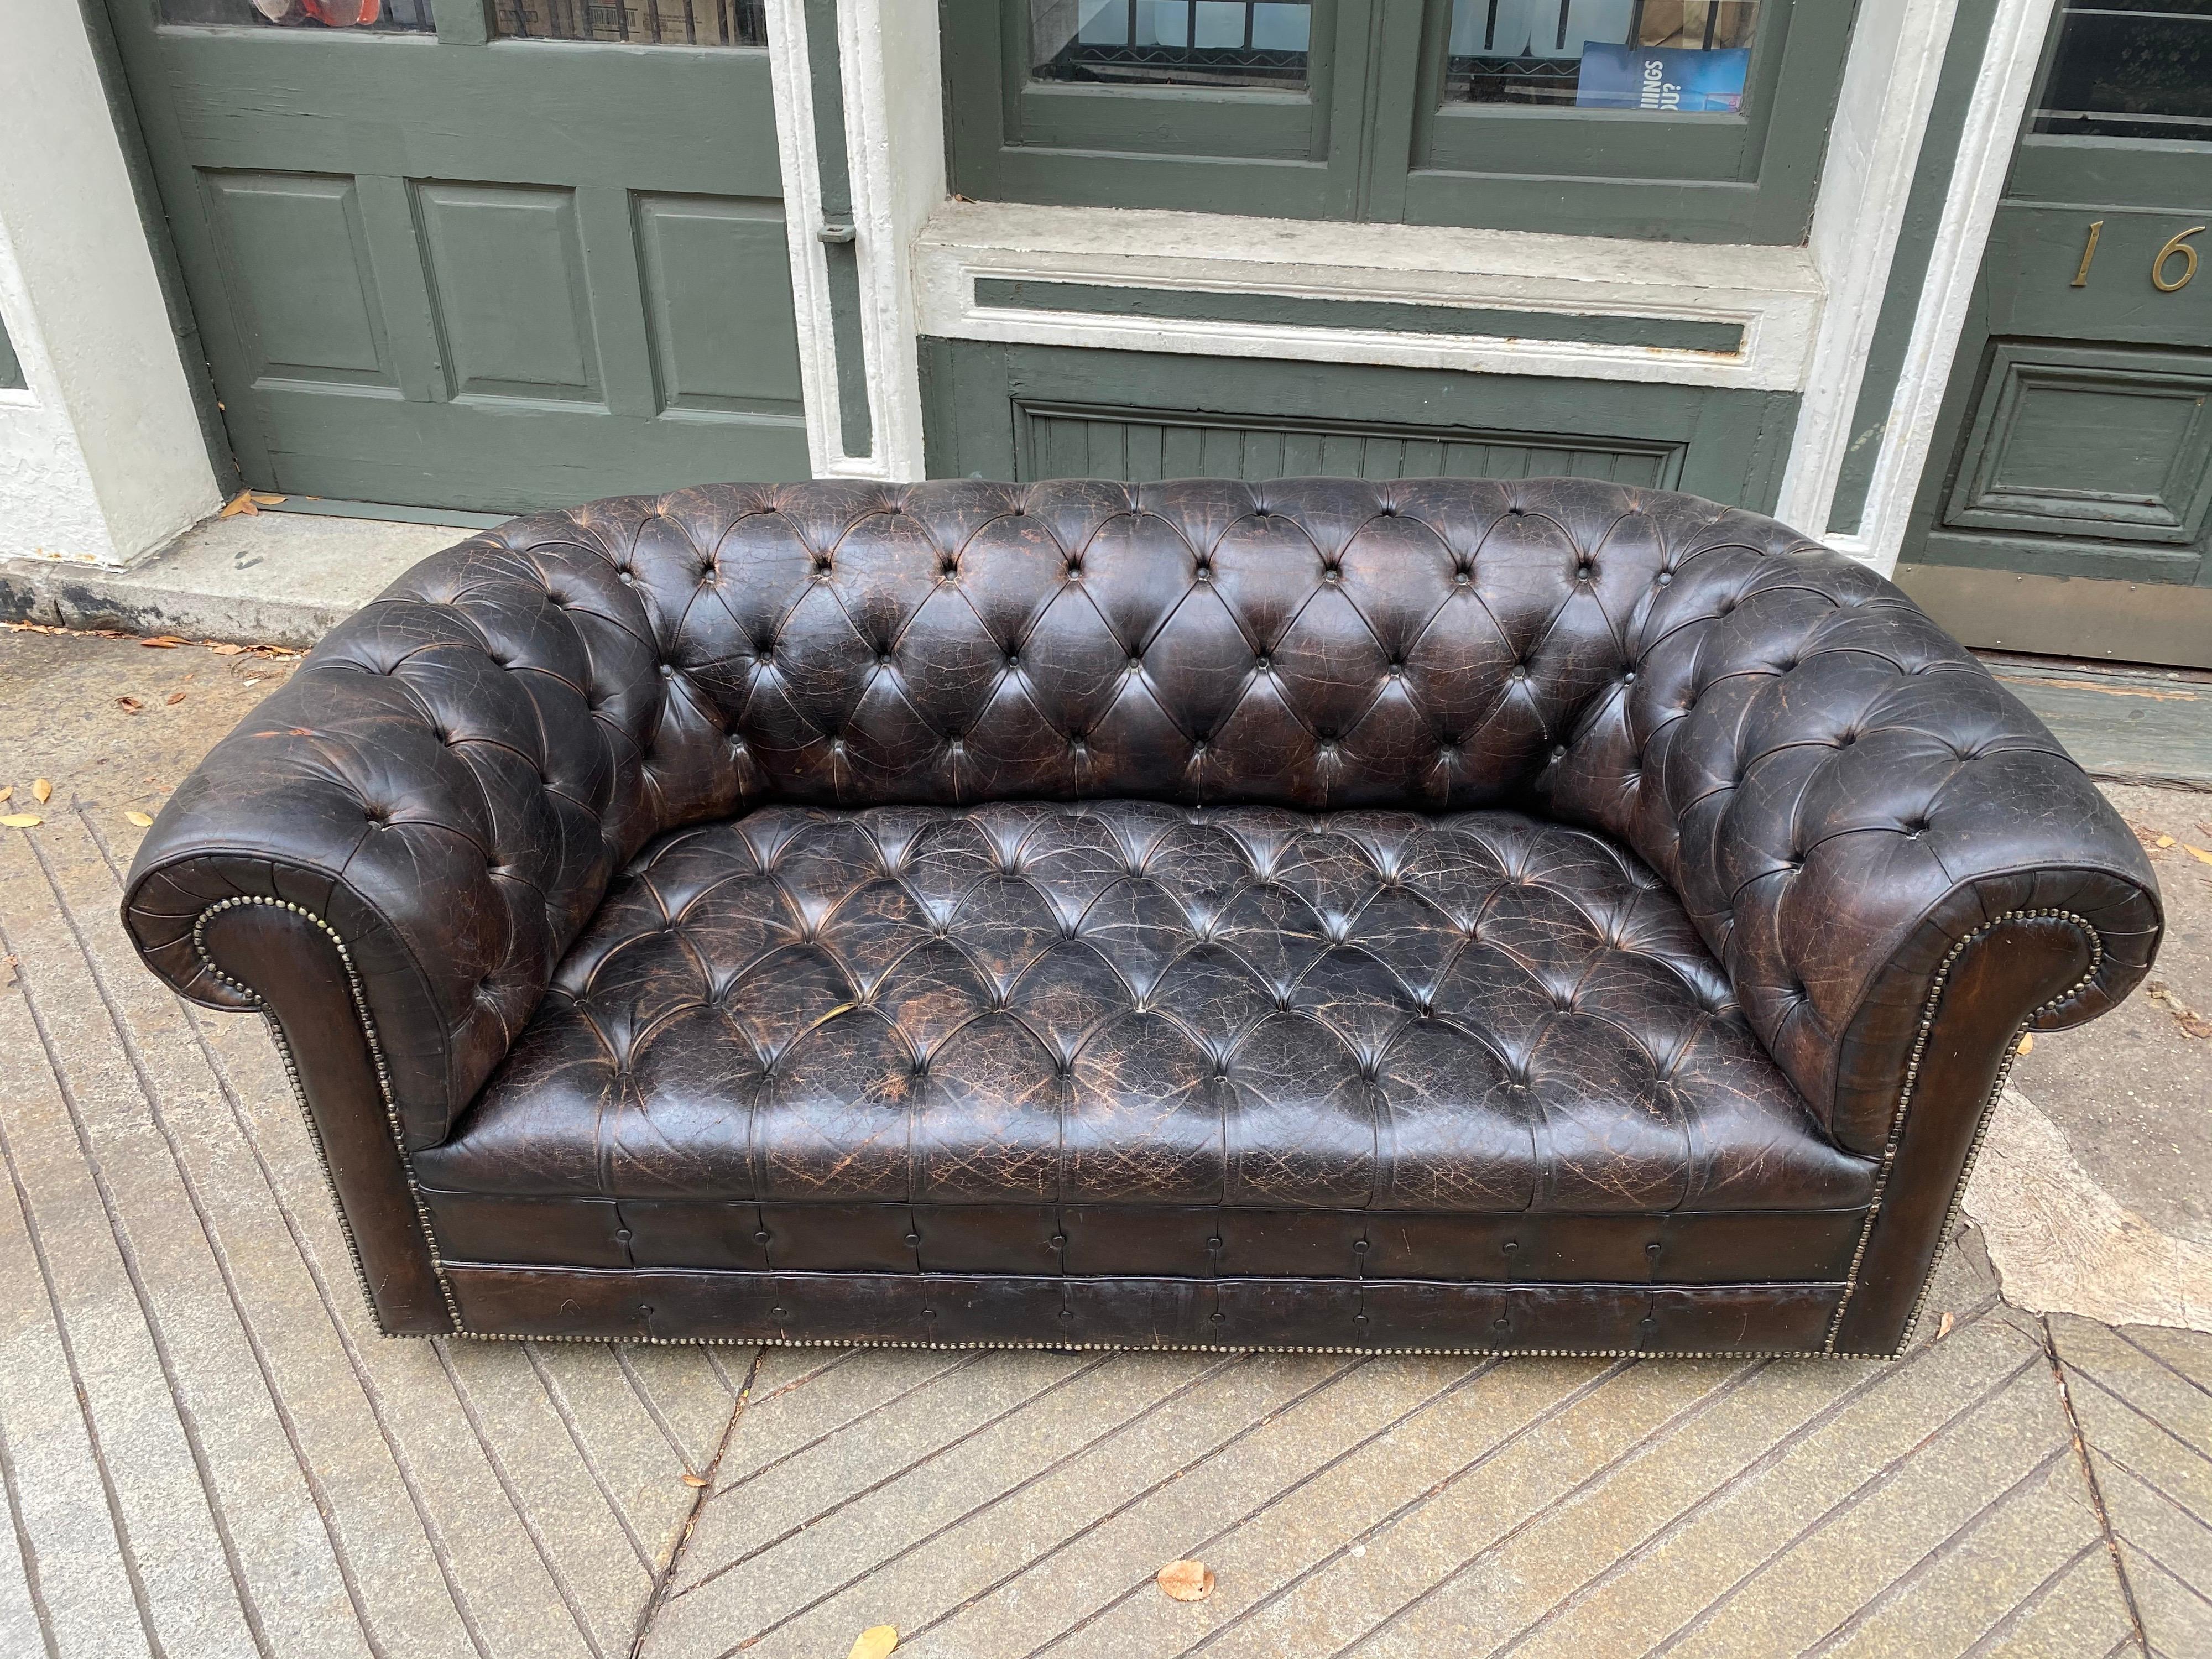 Chesterfield dark brown leather loveseat, dating from the late 1970s or early 1980s. Well worn and loved. Shows 40 plus years of use. Overall Patina is really nice. Three spots as shown in photos where there are small tears to leather. One button